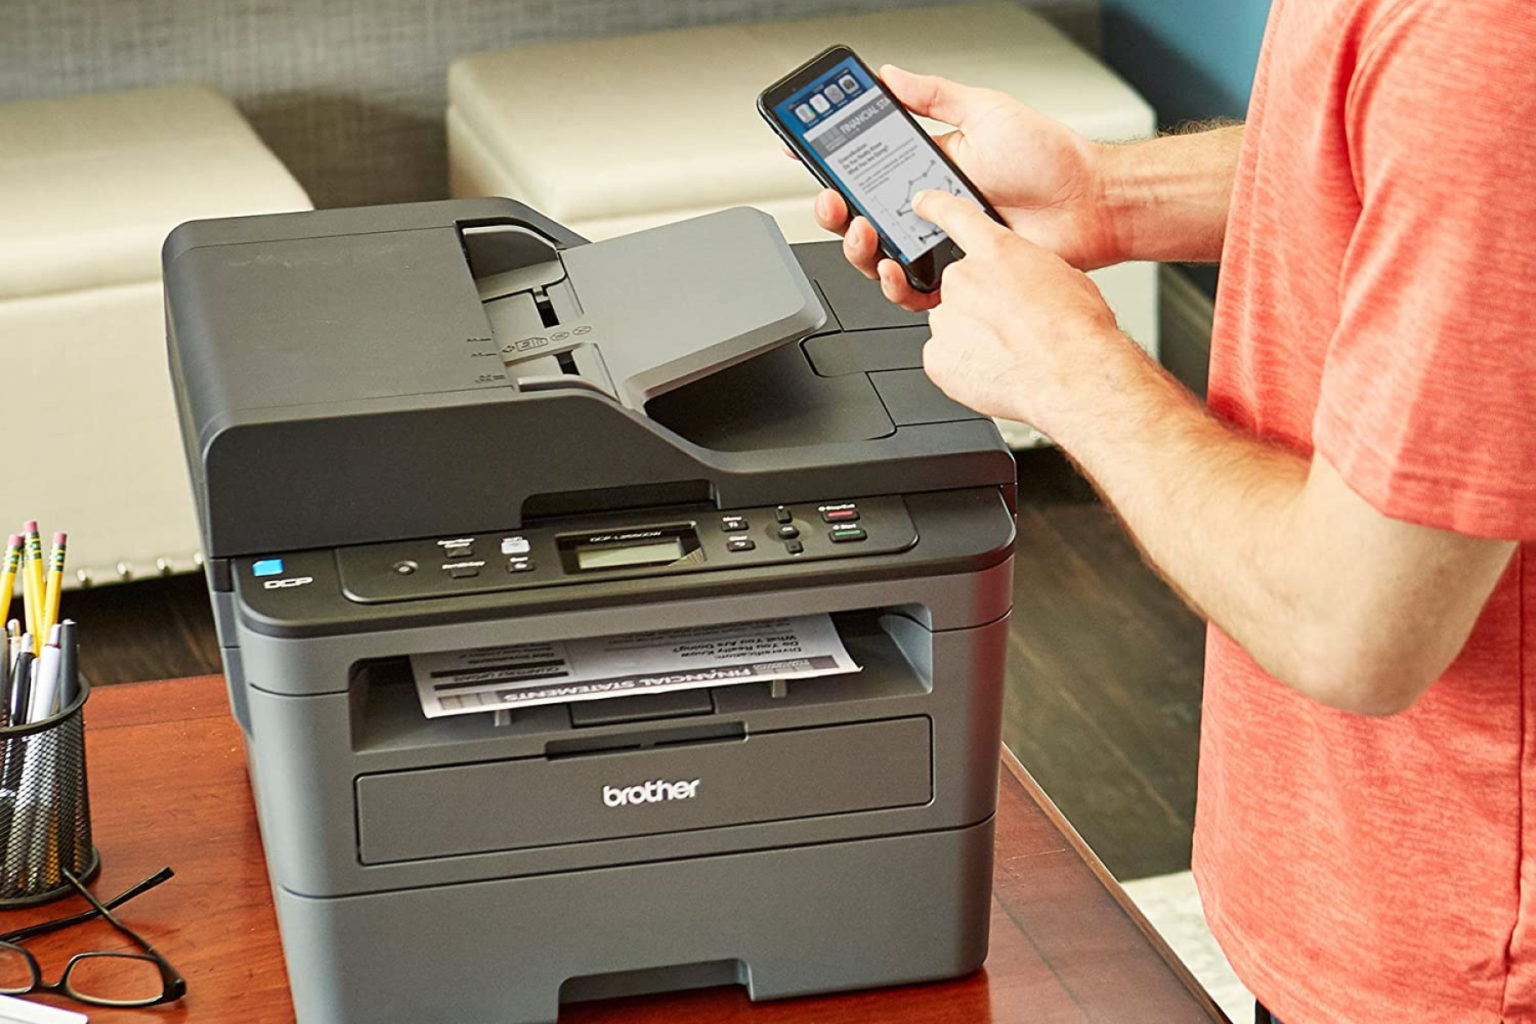 How to Connect Brother Printer to Computer?